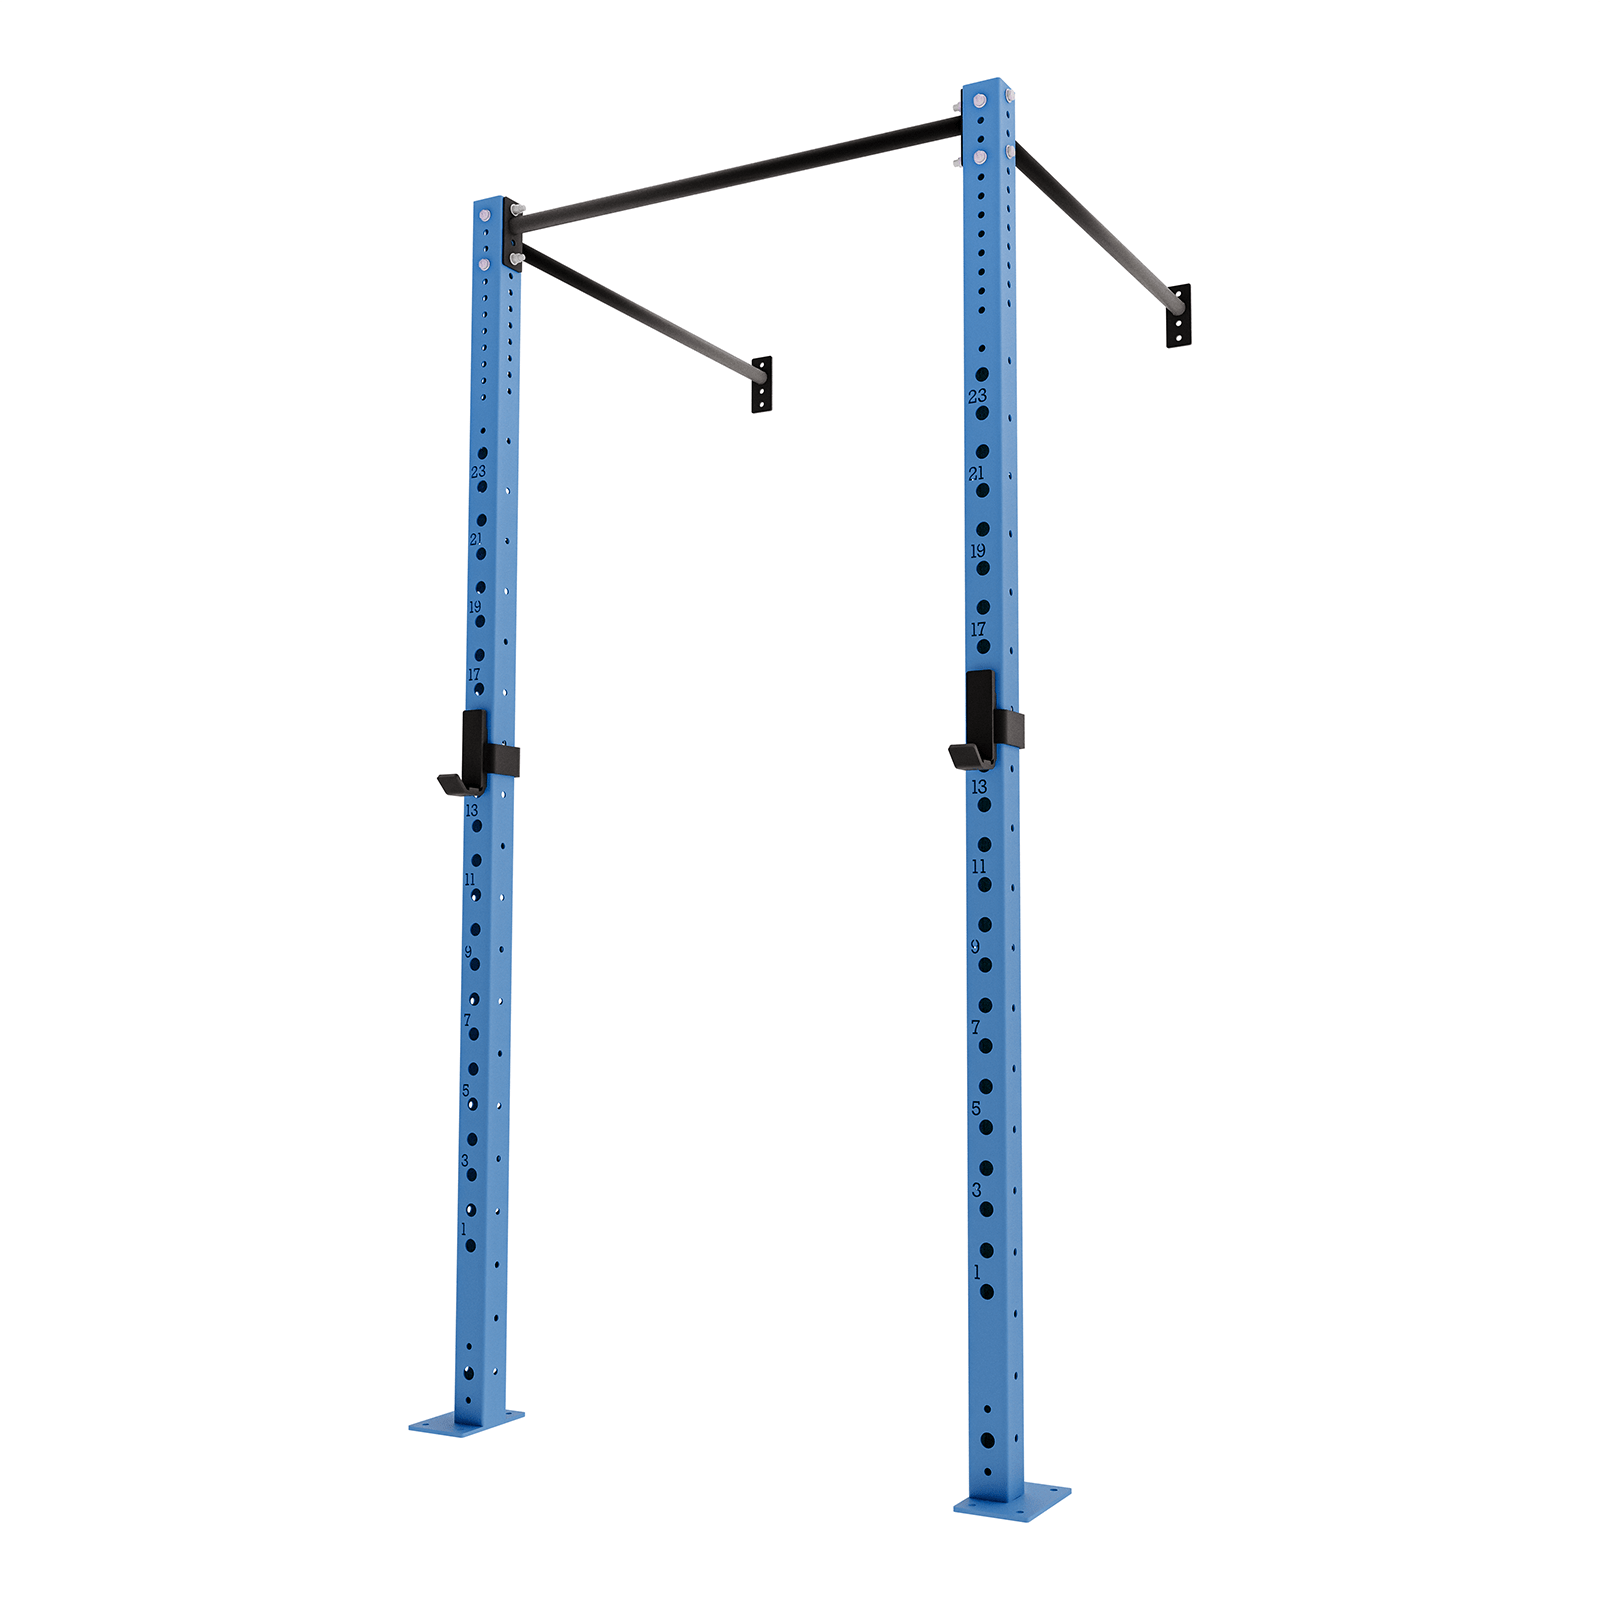 Bison Series - Wall Mounted Rig